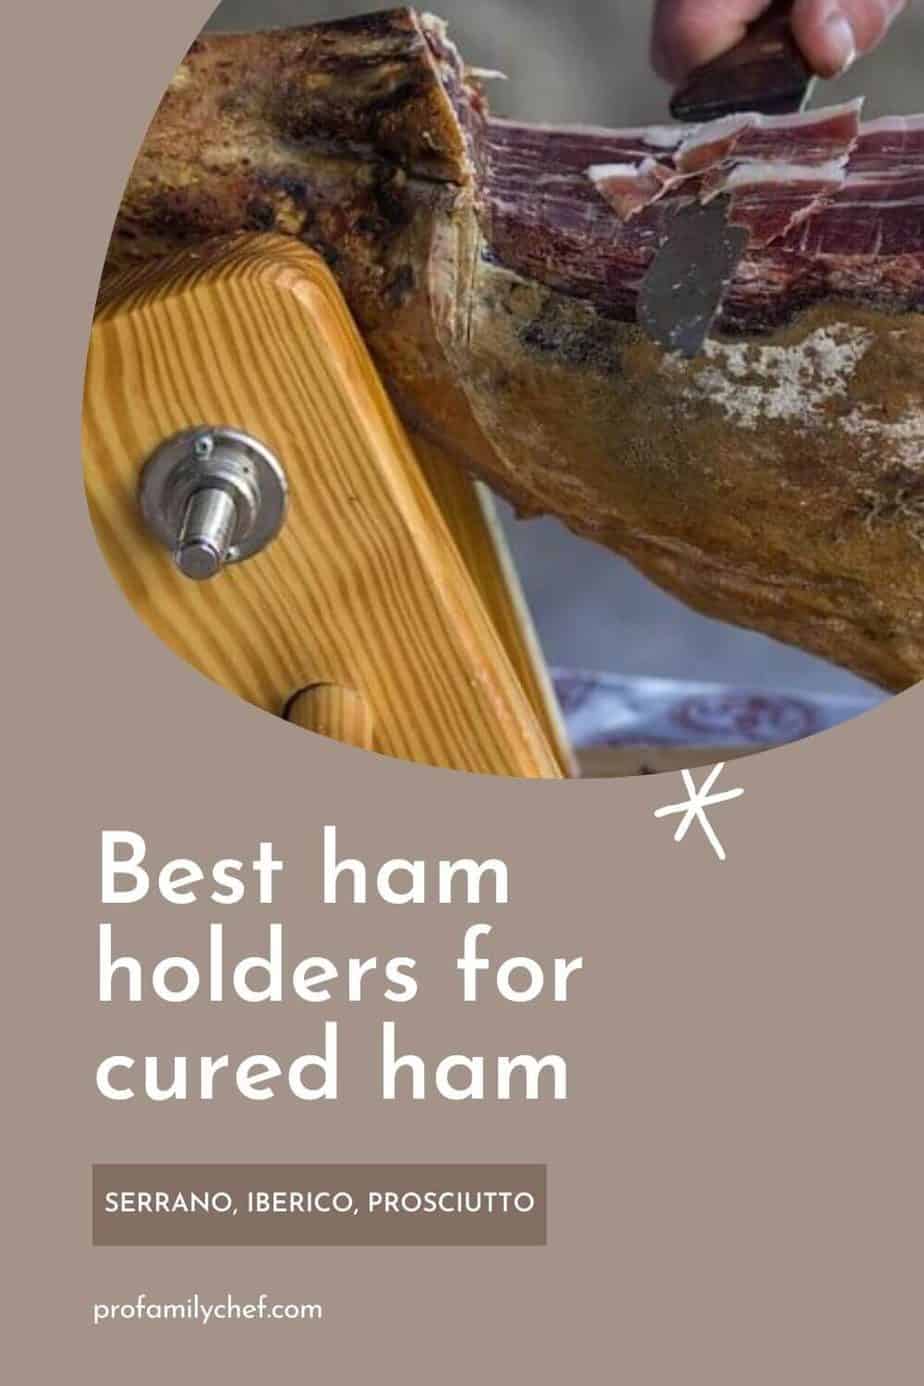 Best ham holders for cured ham